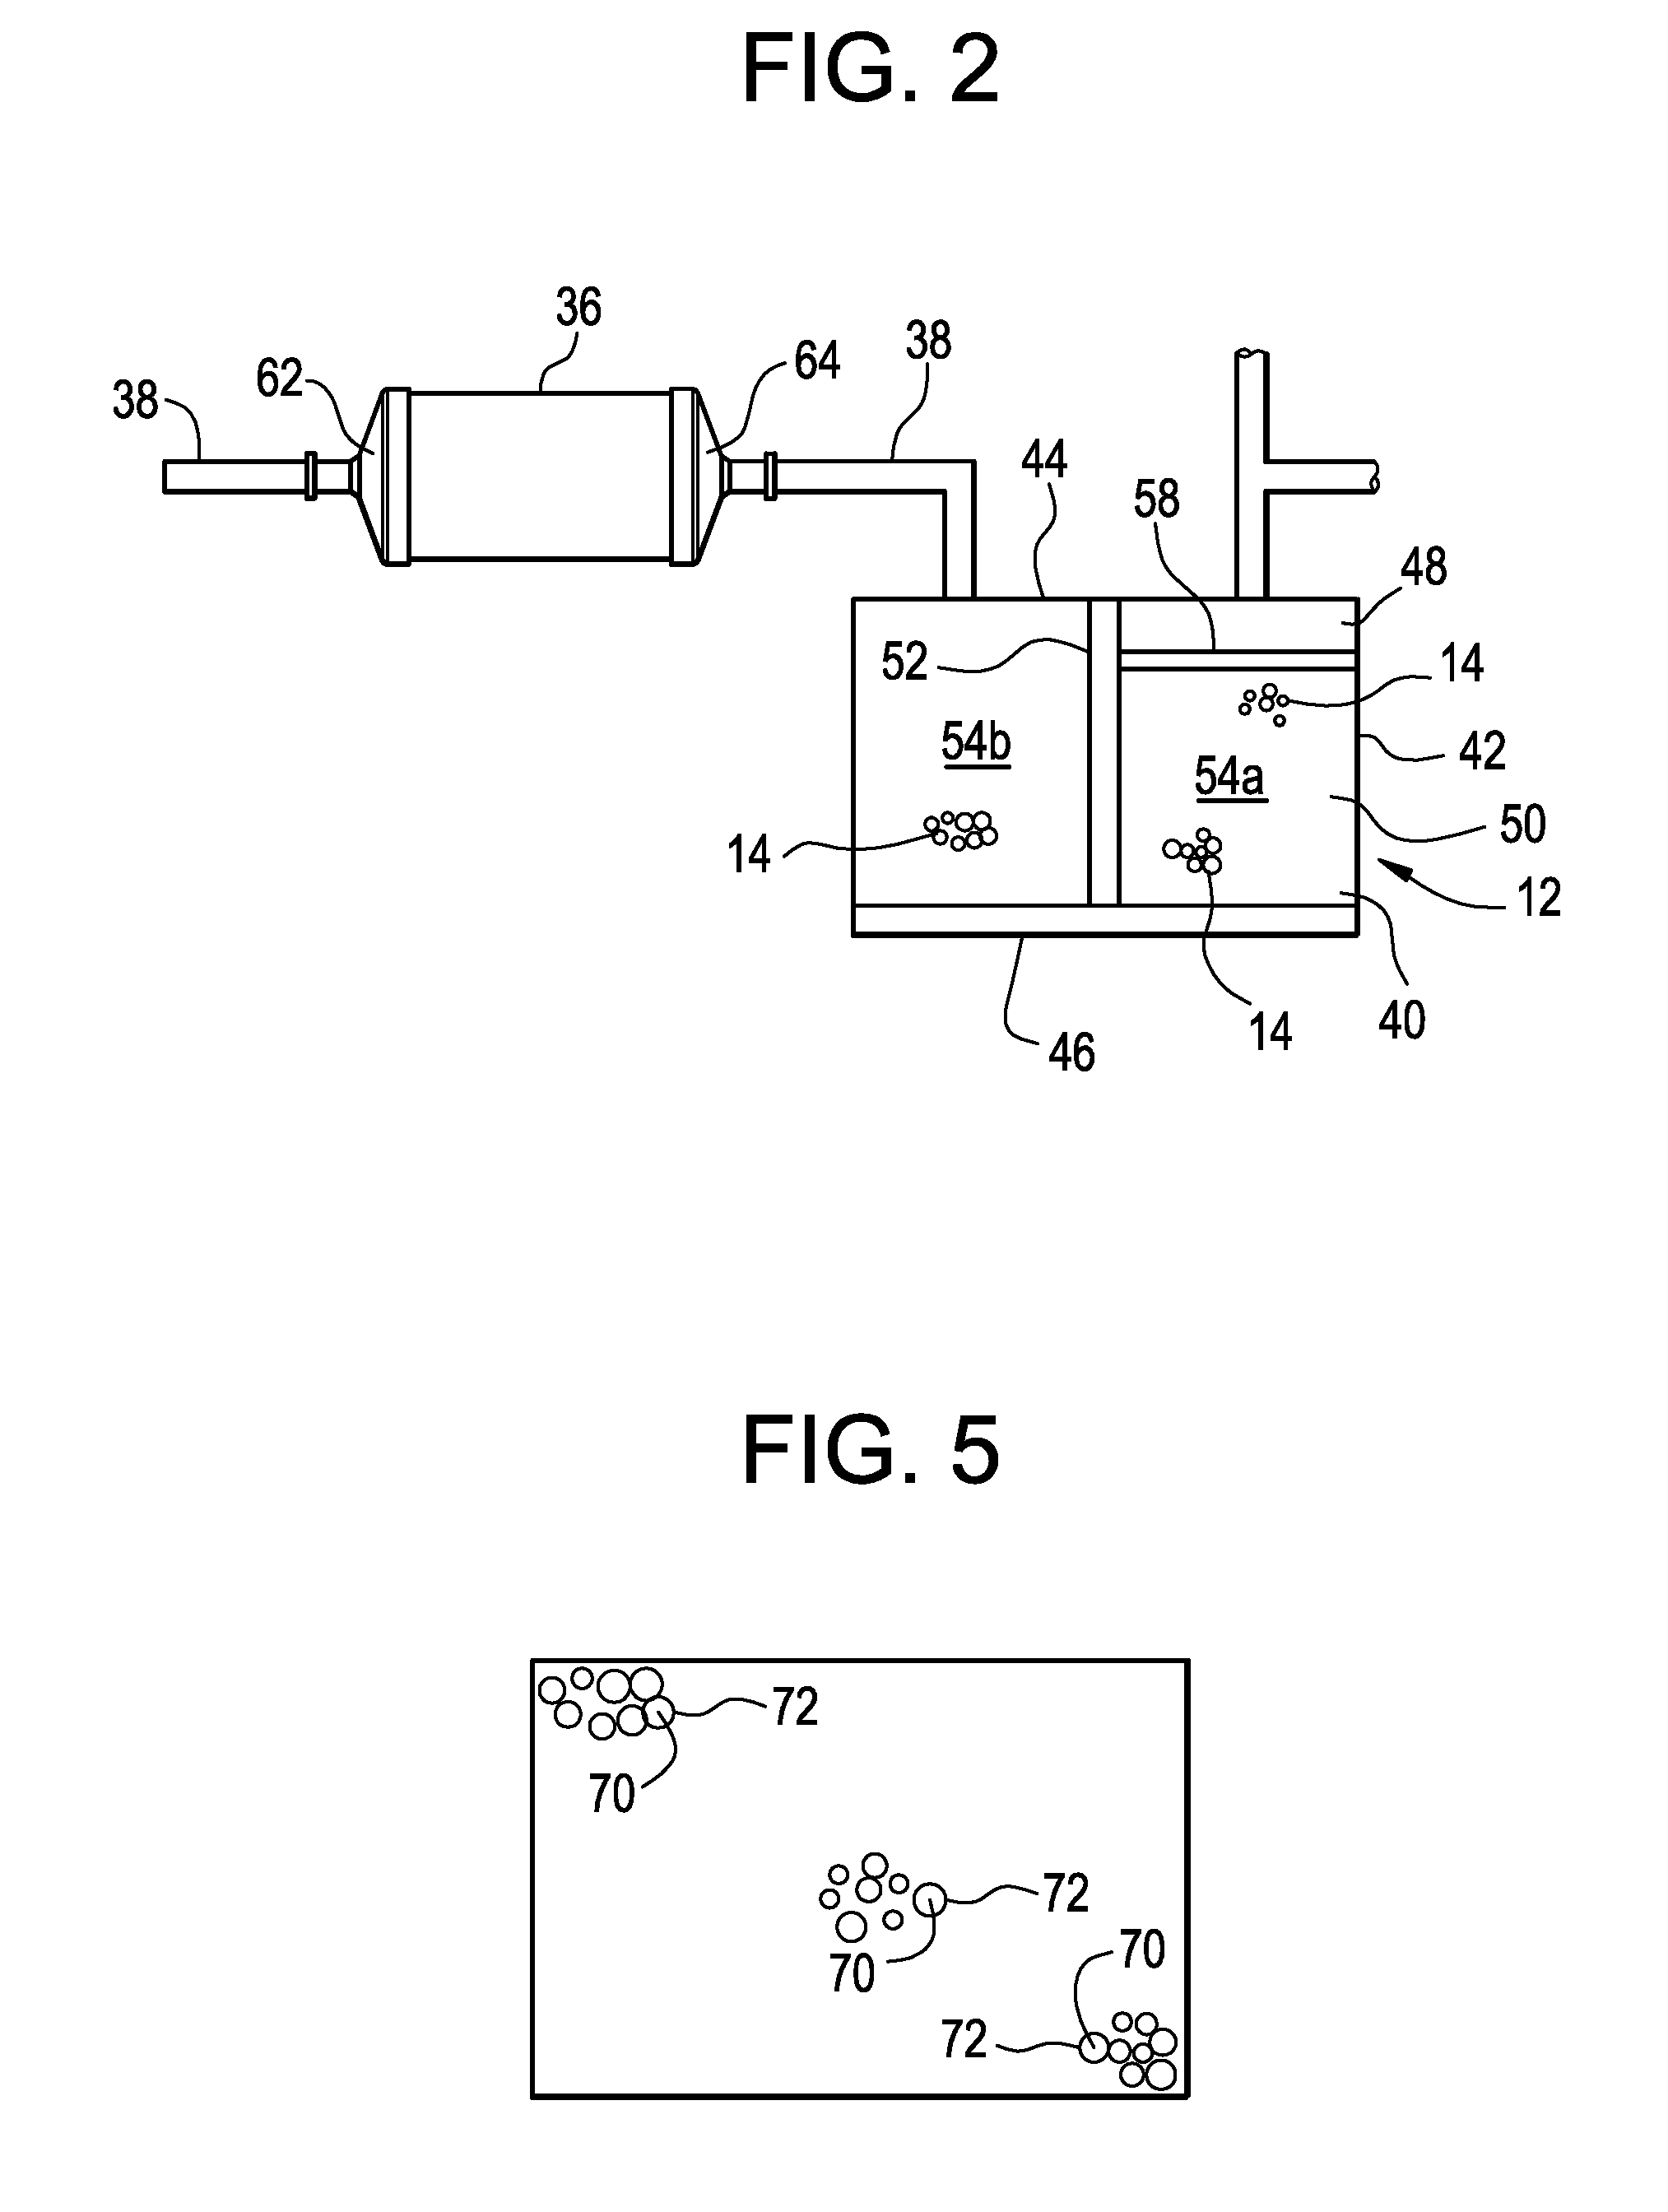 Automotive fuel system for substantially reducing hydrocarbon emissions into the atmosphere, and method